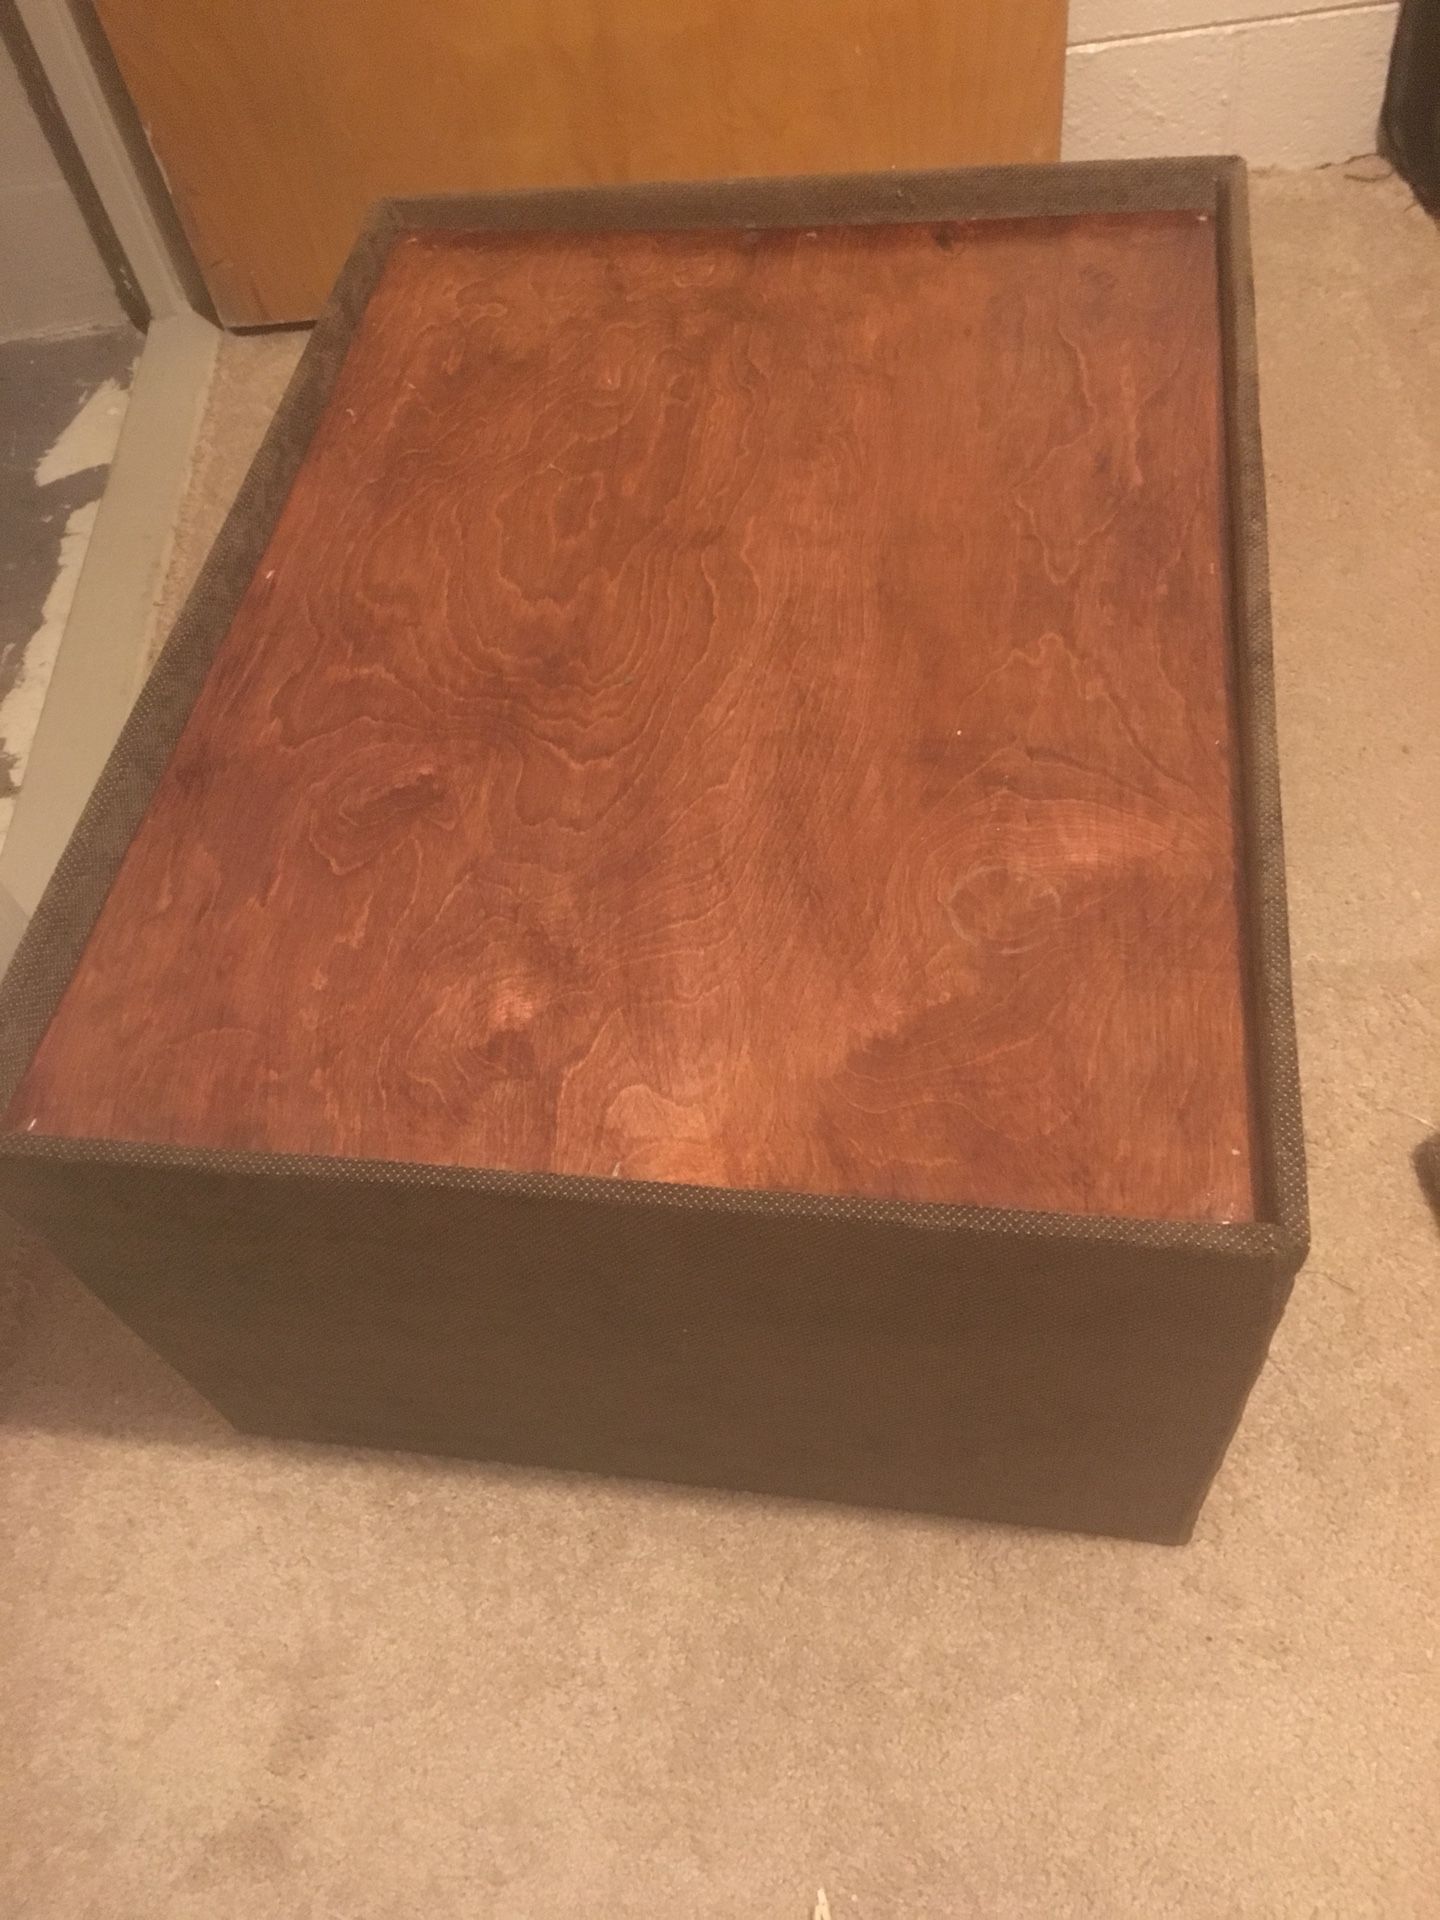 New coffee tables